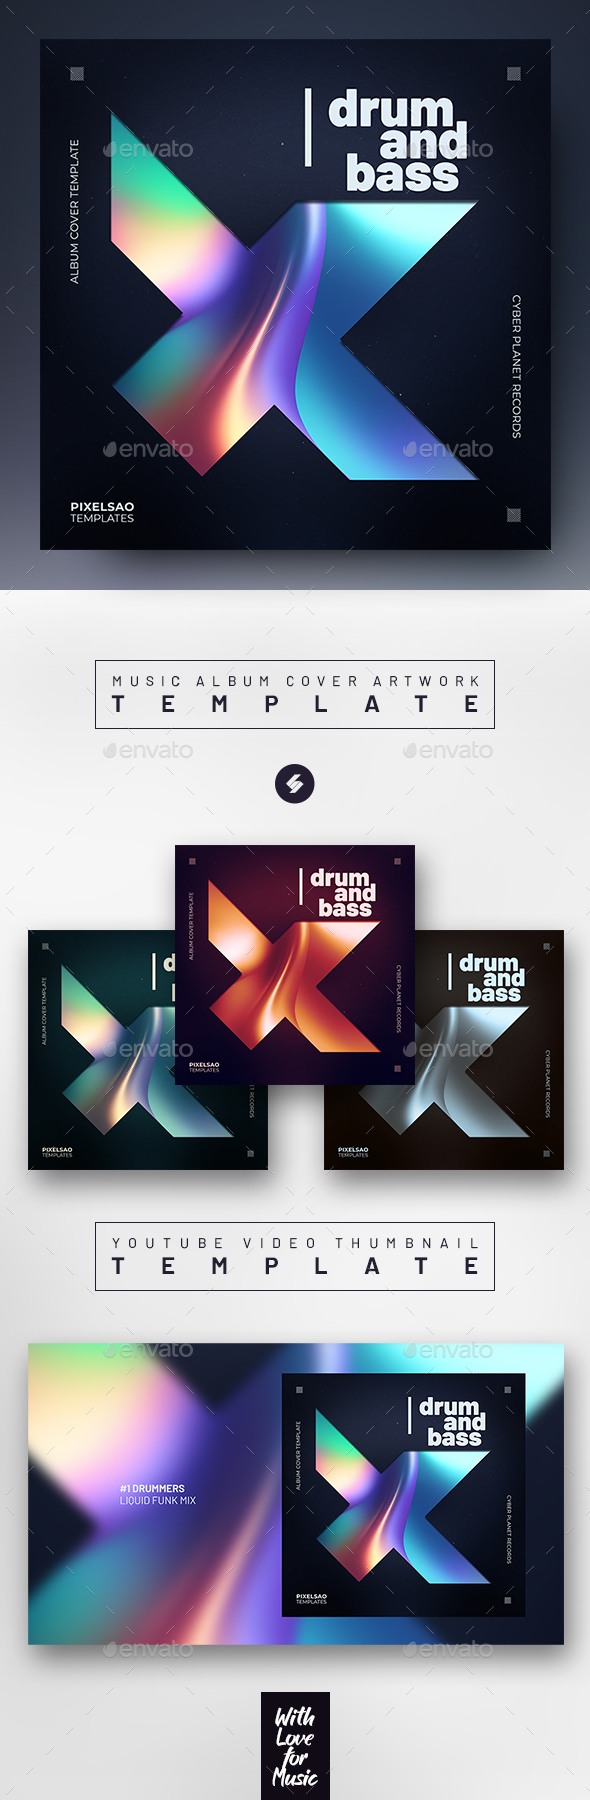 [DOWNLOAD]Drum And Bass Album Cover Template